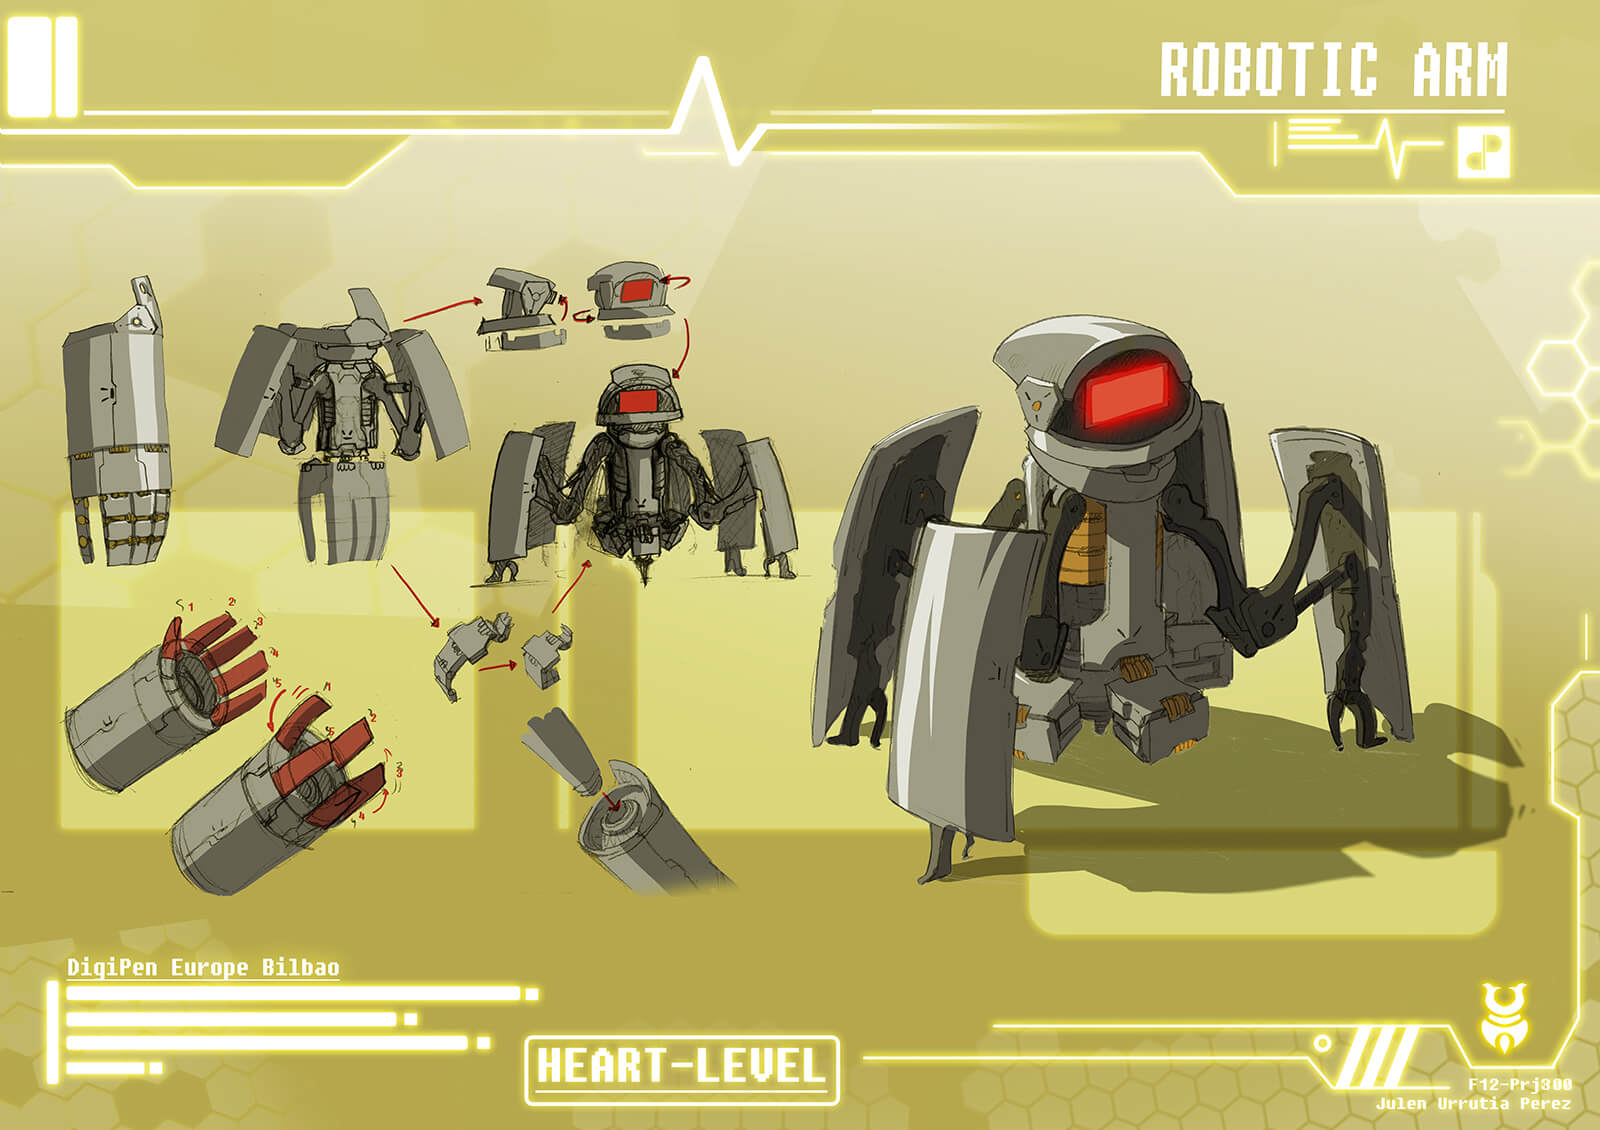 Concept paintings of metallic arm armor from the film Heart Level as it deploys into a short, red-faced robot